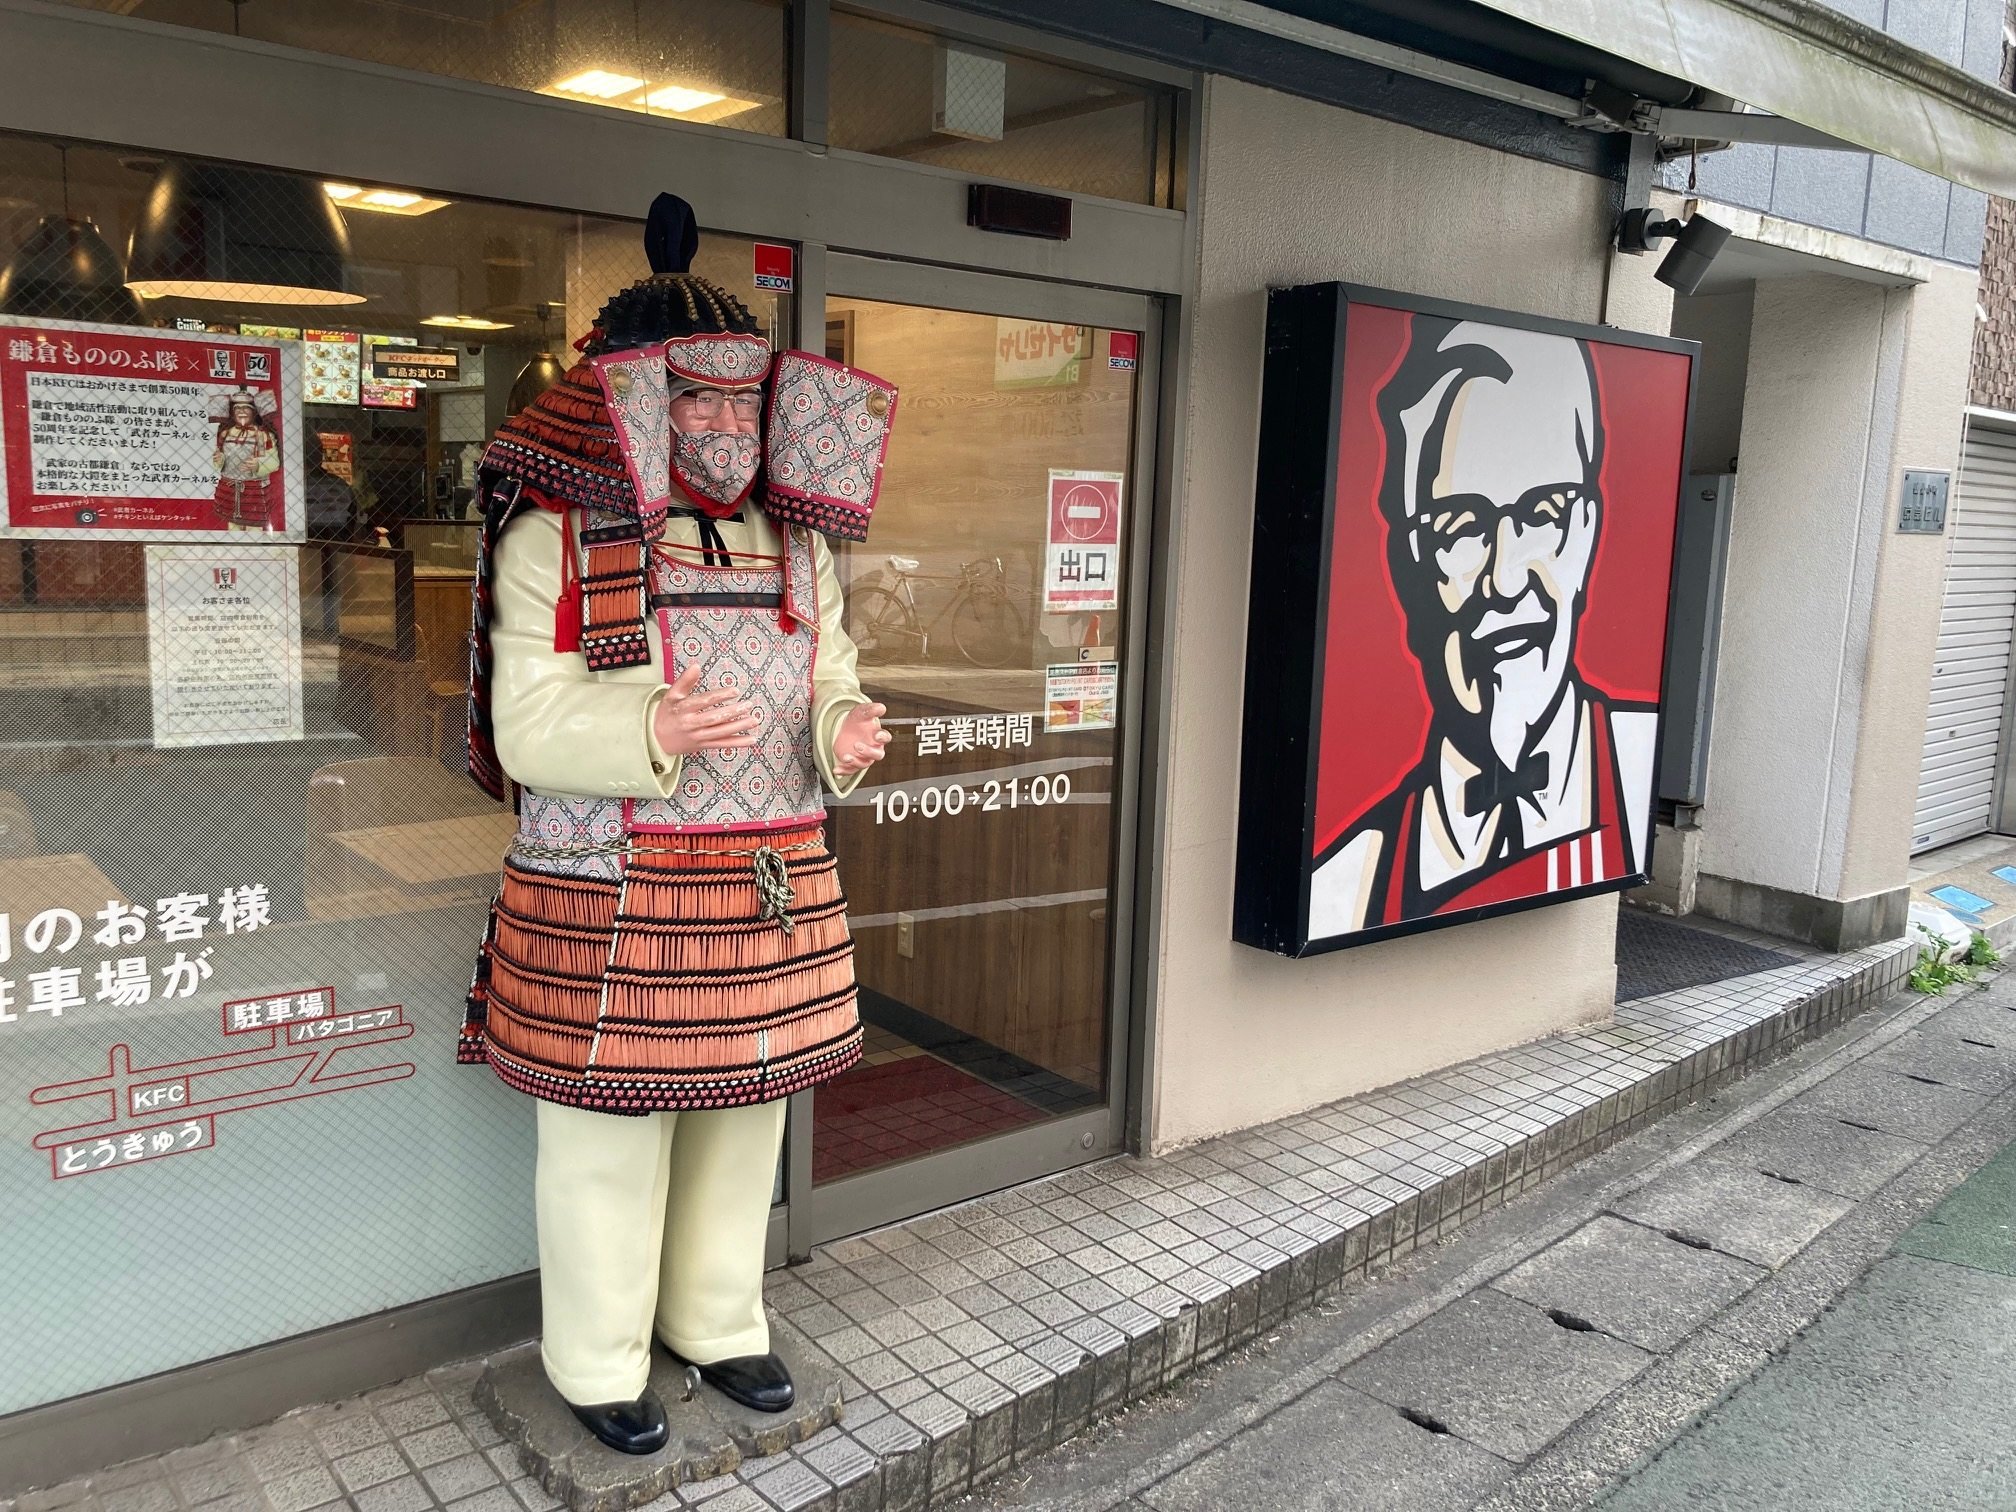 A KFC outlet in Kamakura, south of Tokyo. Photo: Neil Newman